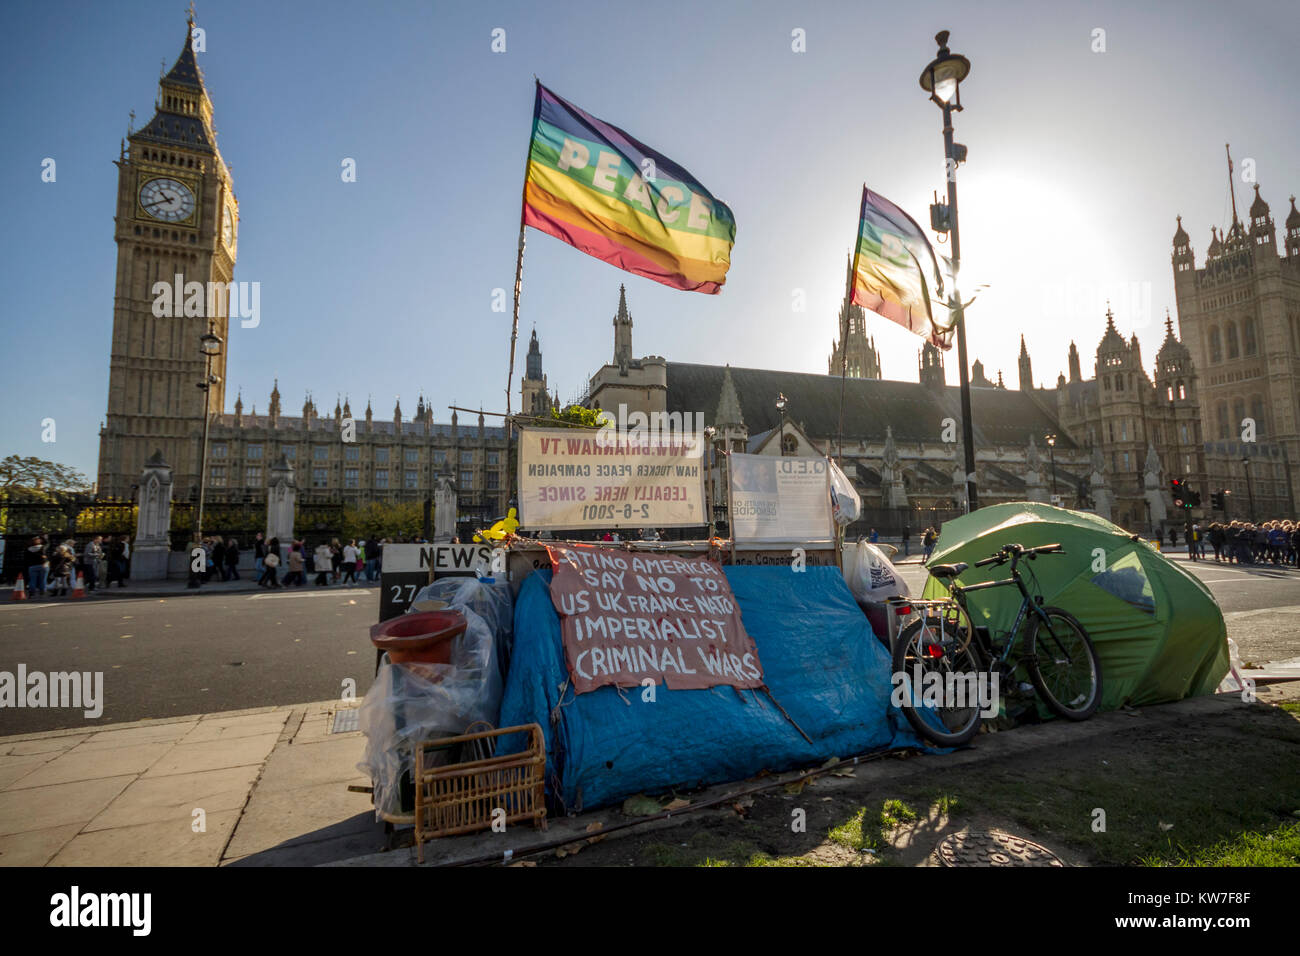 The Parliament Square Peace Campaign peace camp outside the Palace of Westminster in Parliament Square, London, UK Stock Photo